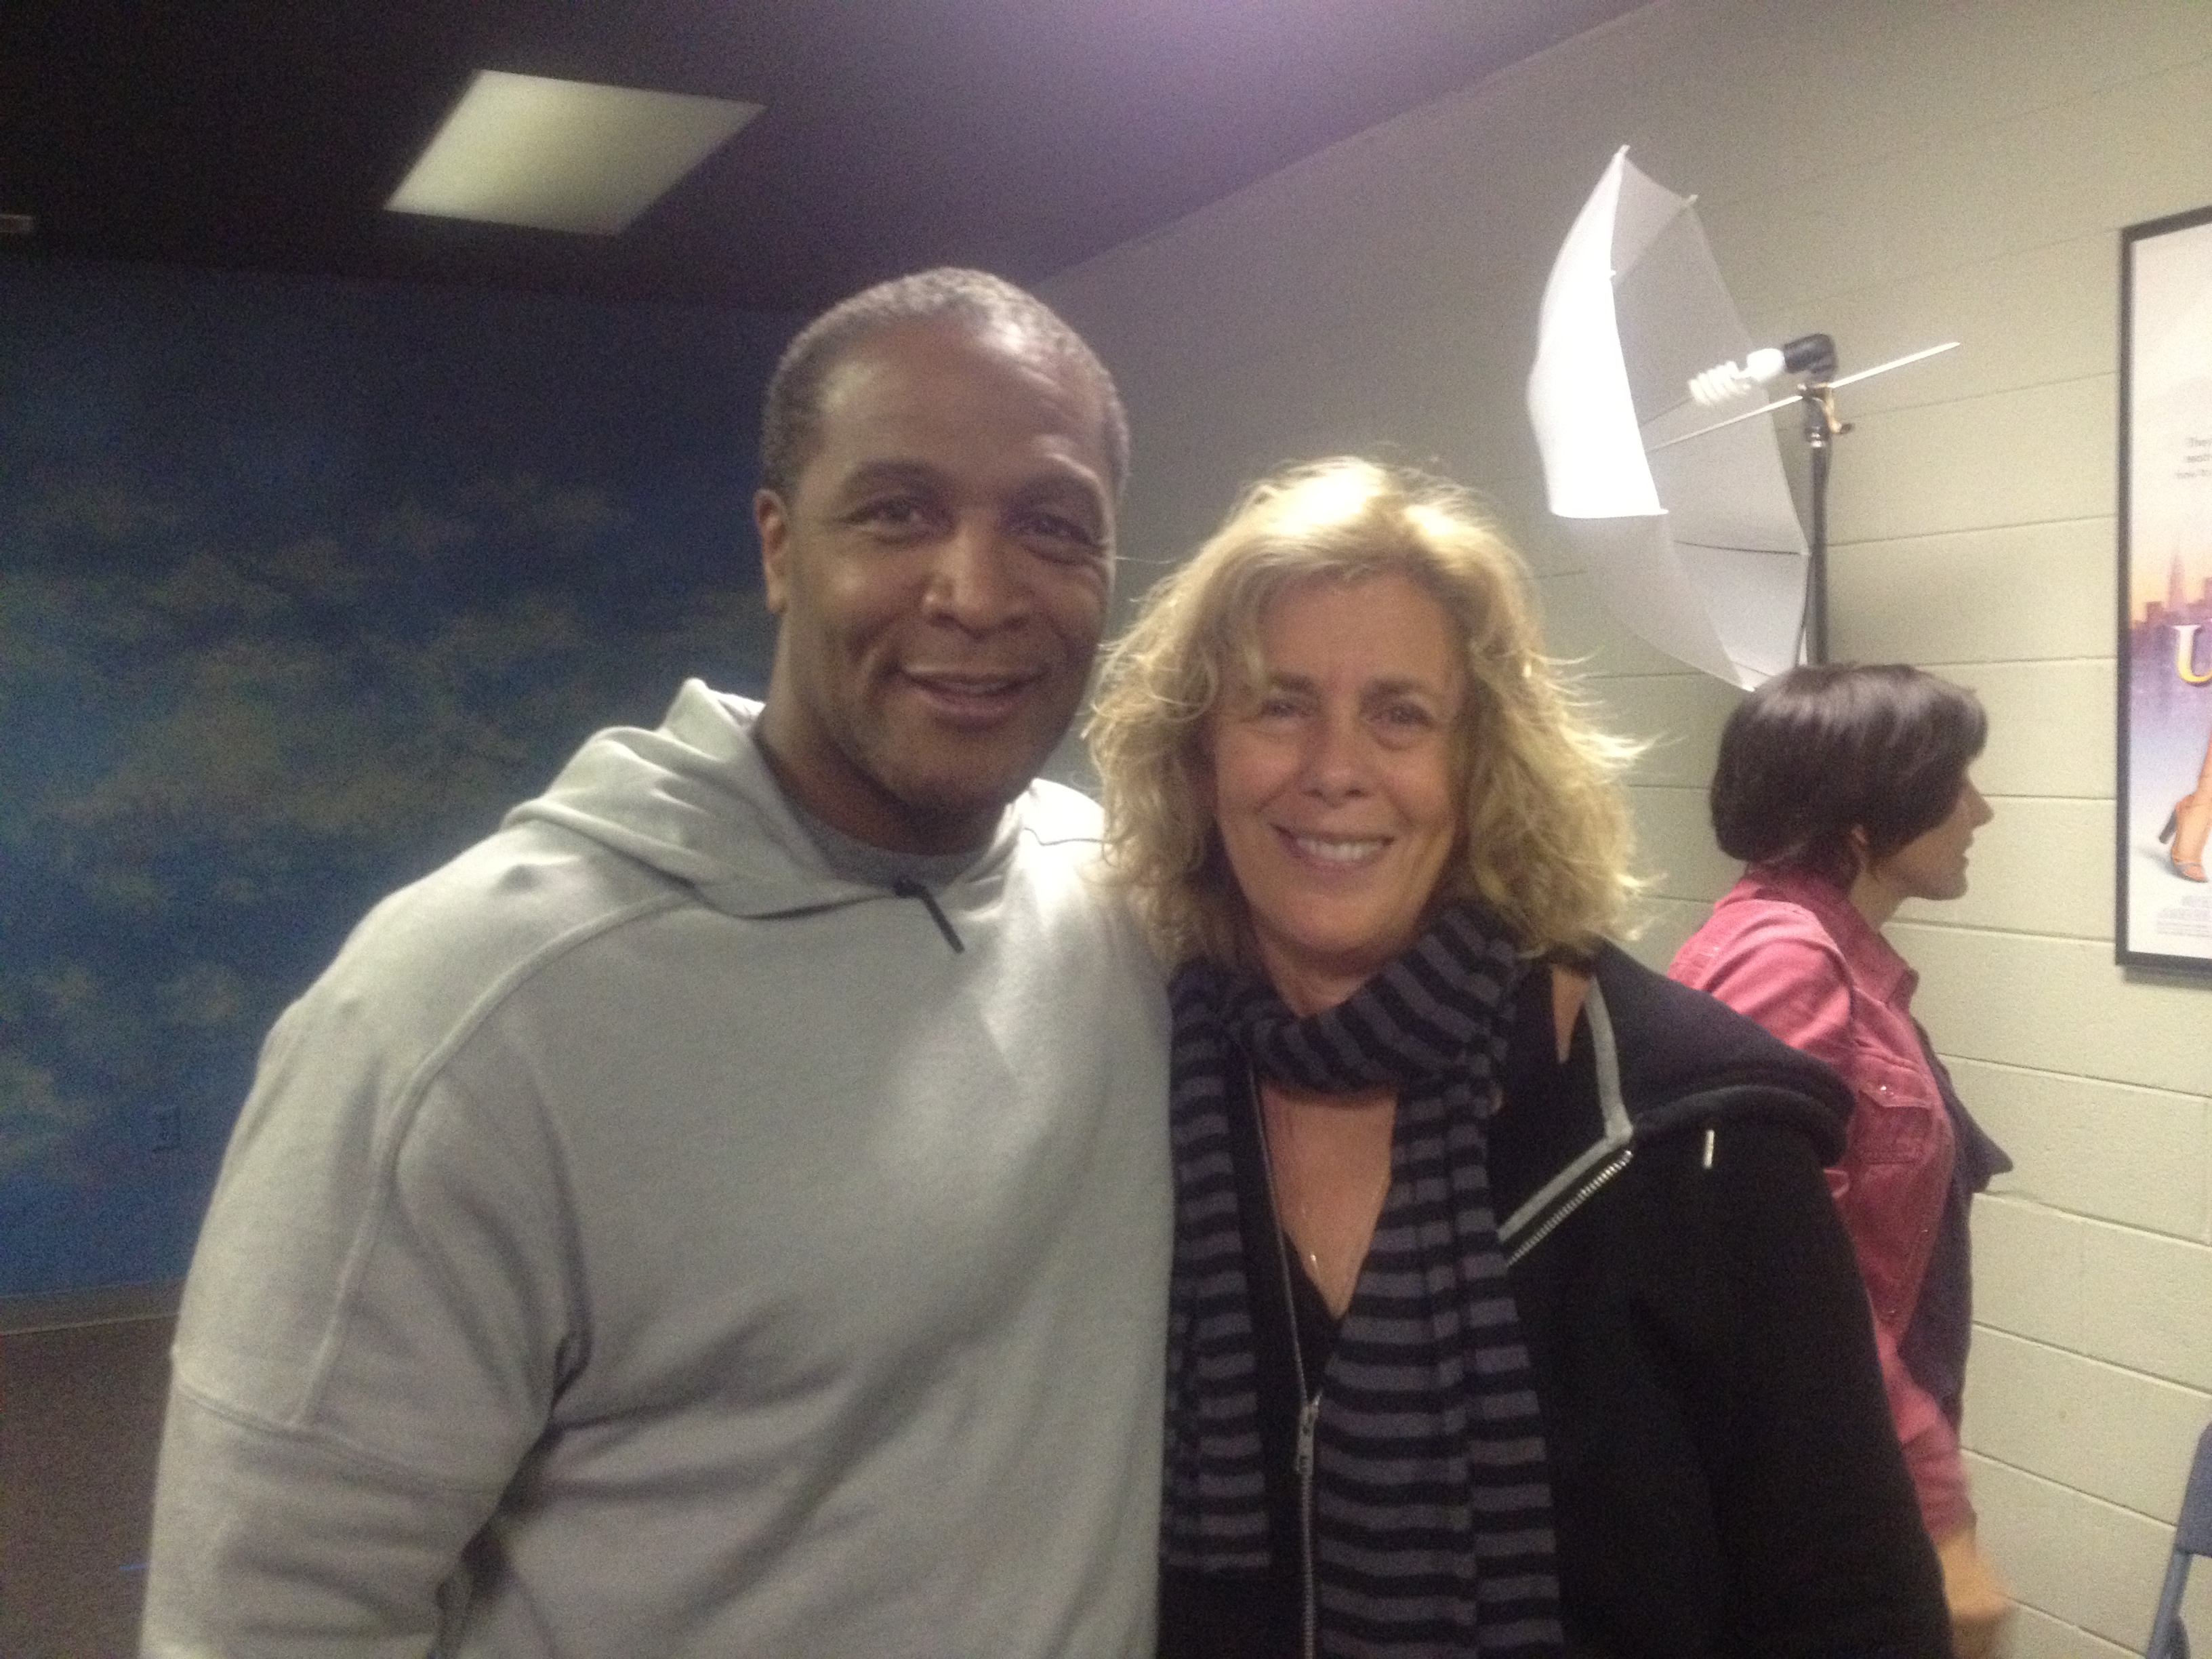 Darryl Booker and Margie Haber #1 Hollywood acting coach